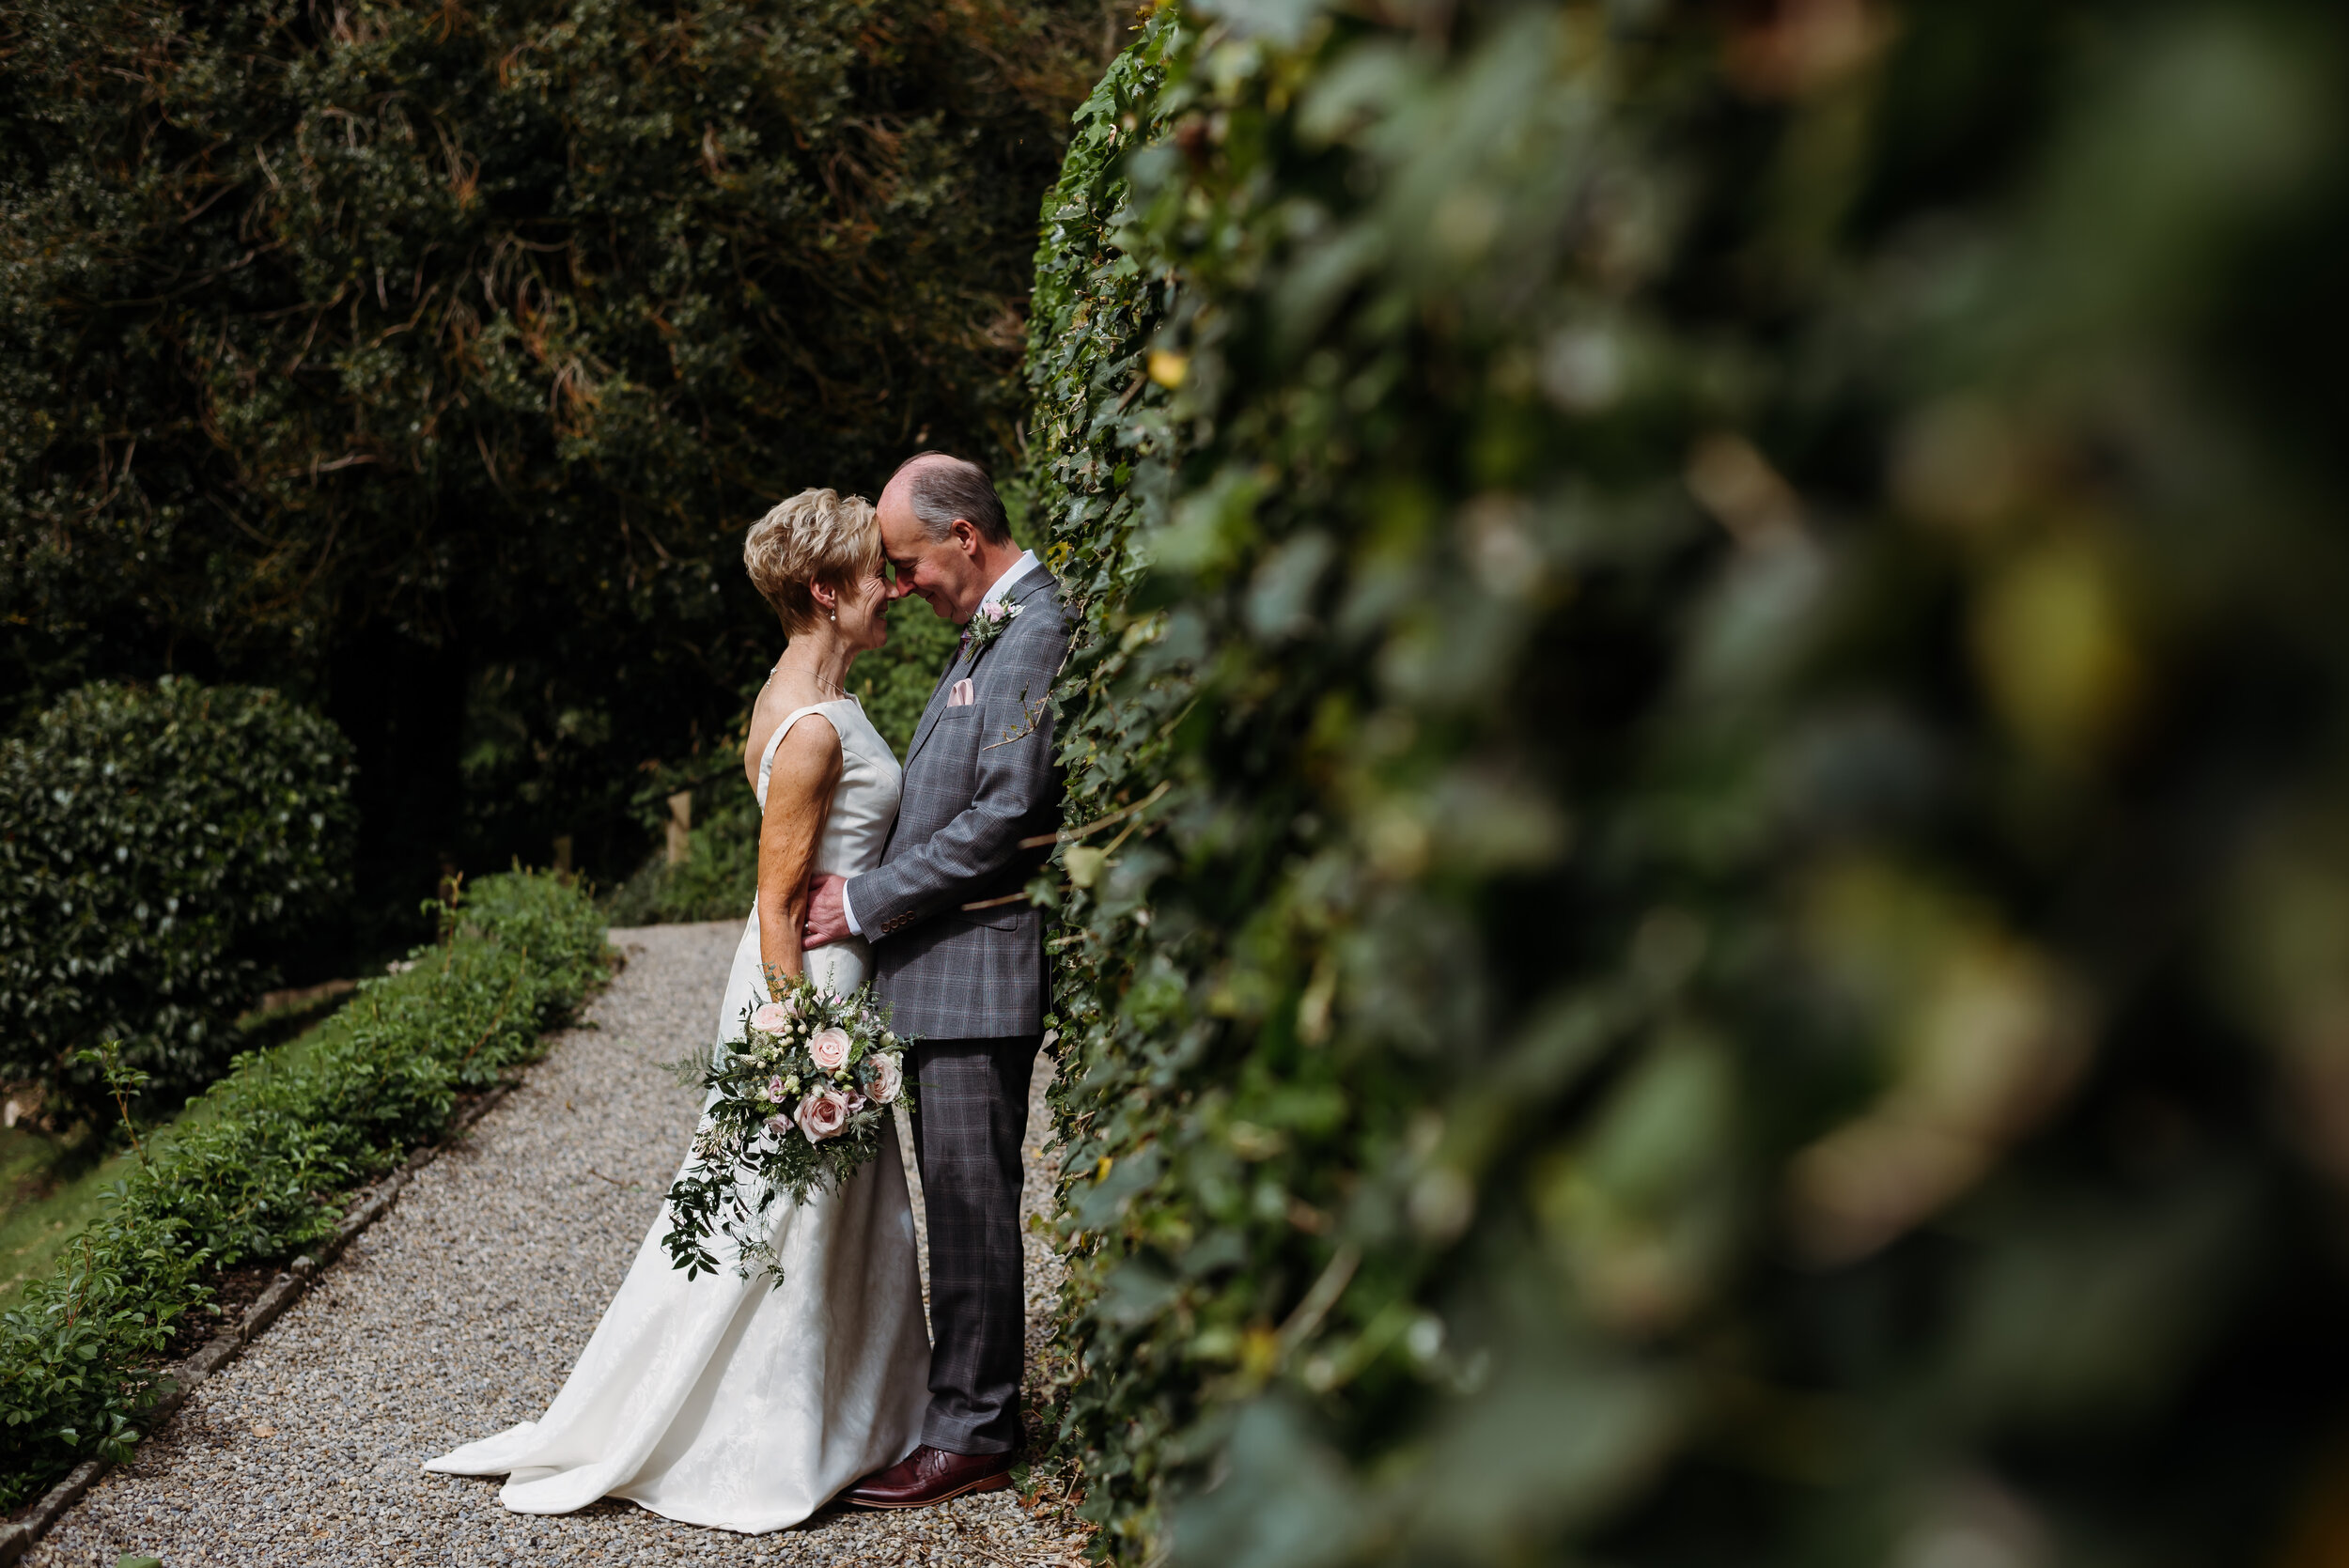 Gorgeous older couple getting married at Mitton Hall